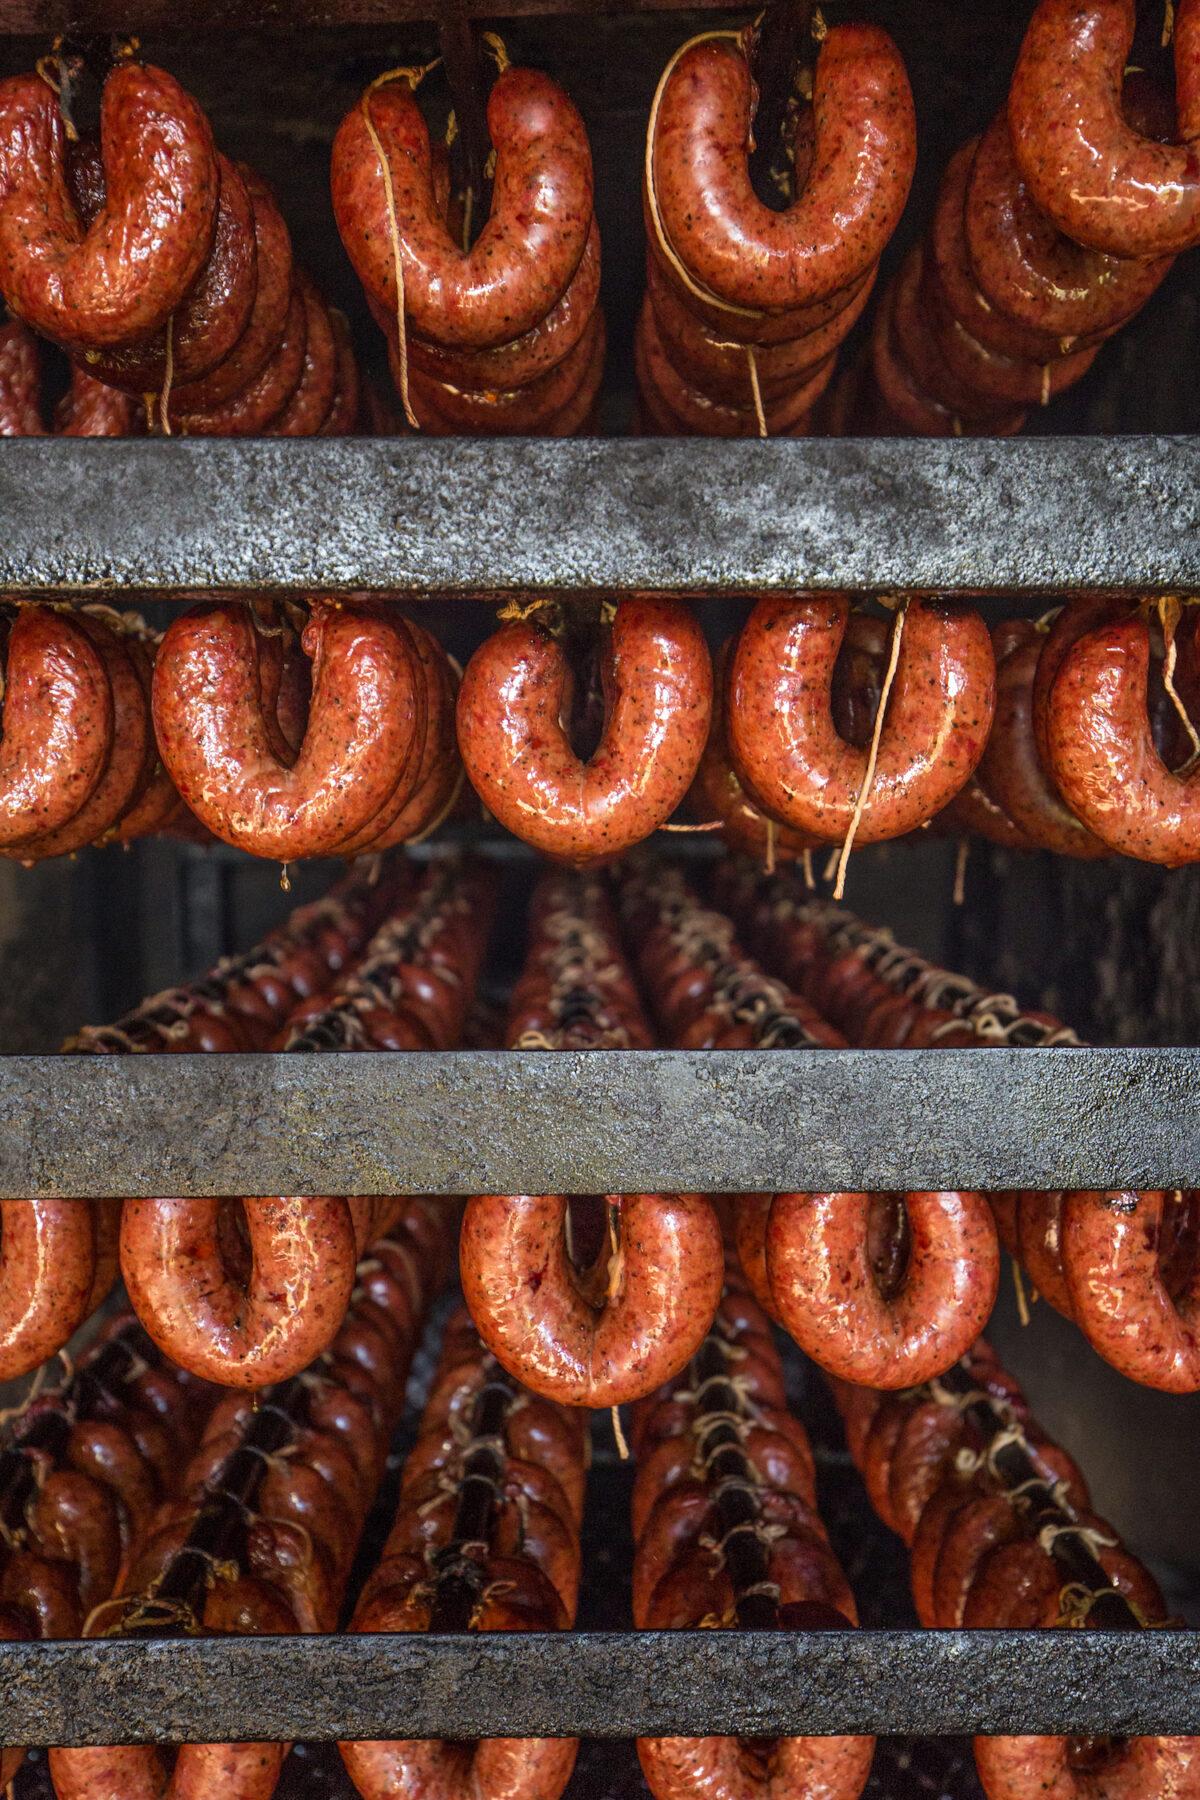 The Davila family's housemade beef sausages are a local favorite. (Courtesy of Davila's BBQ)